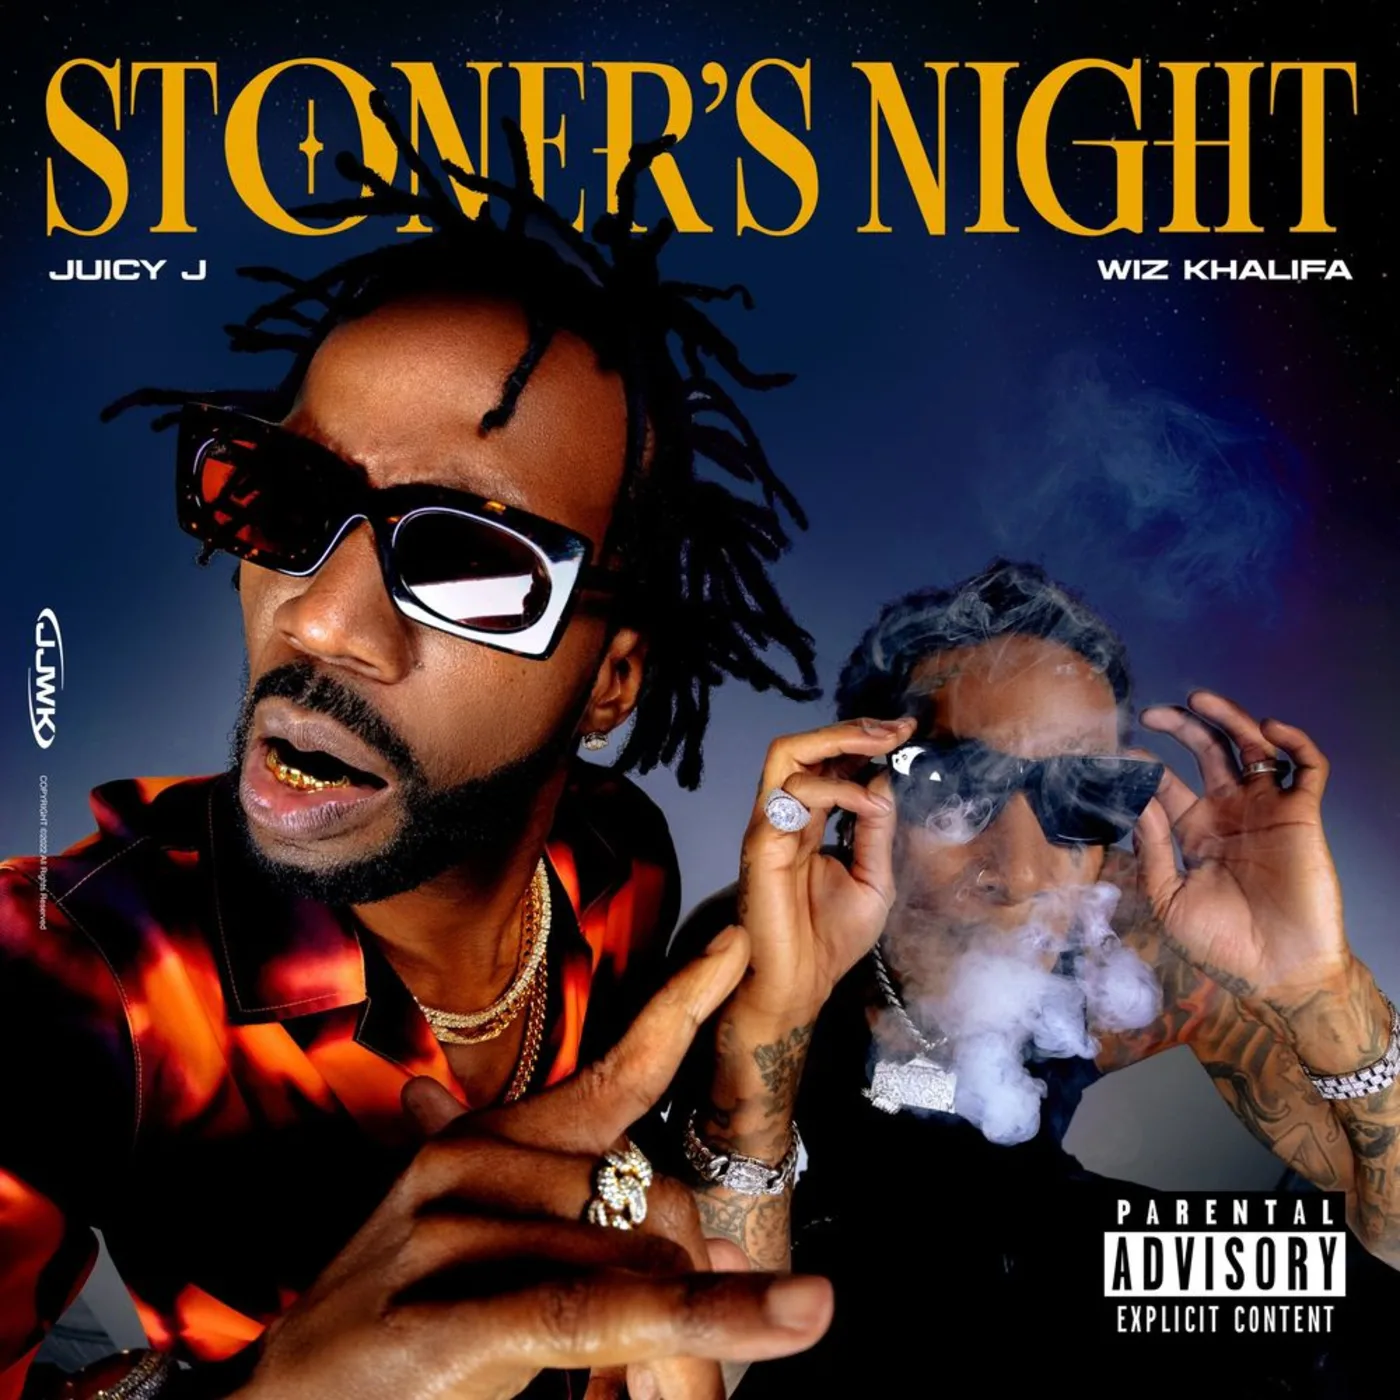 Juicy J And Wiz Khalifa Pop Out With Collaborative Album, ‘Stoner’s Night’, Yours Truly, News, August 11, 2022